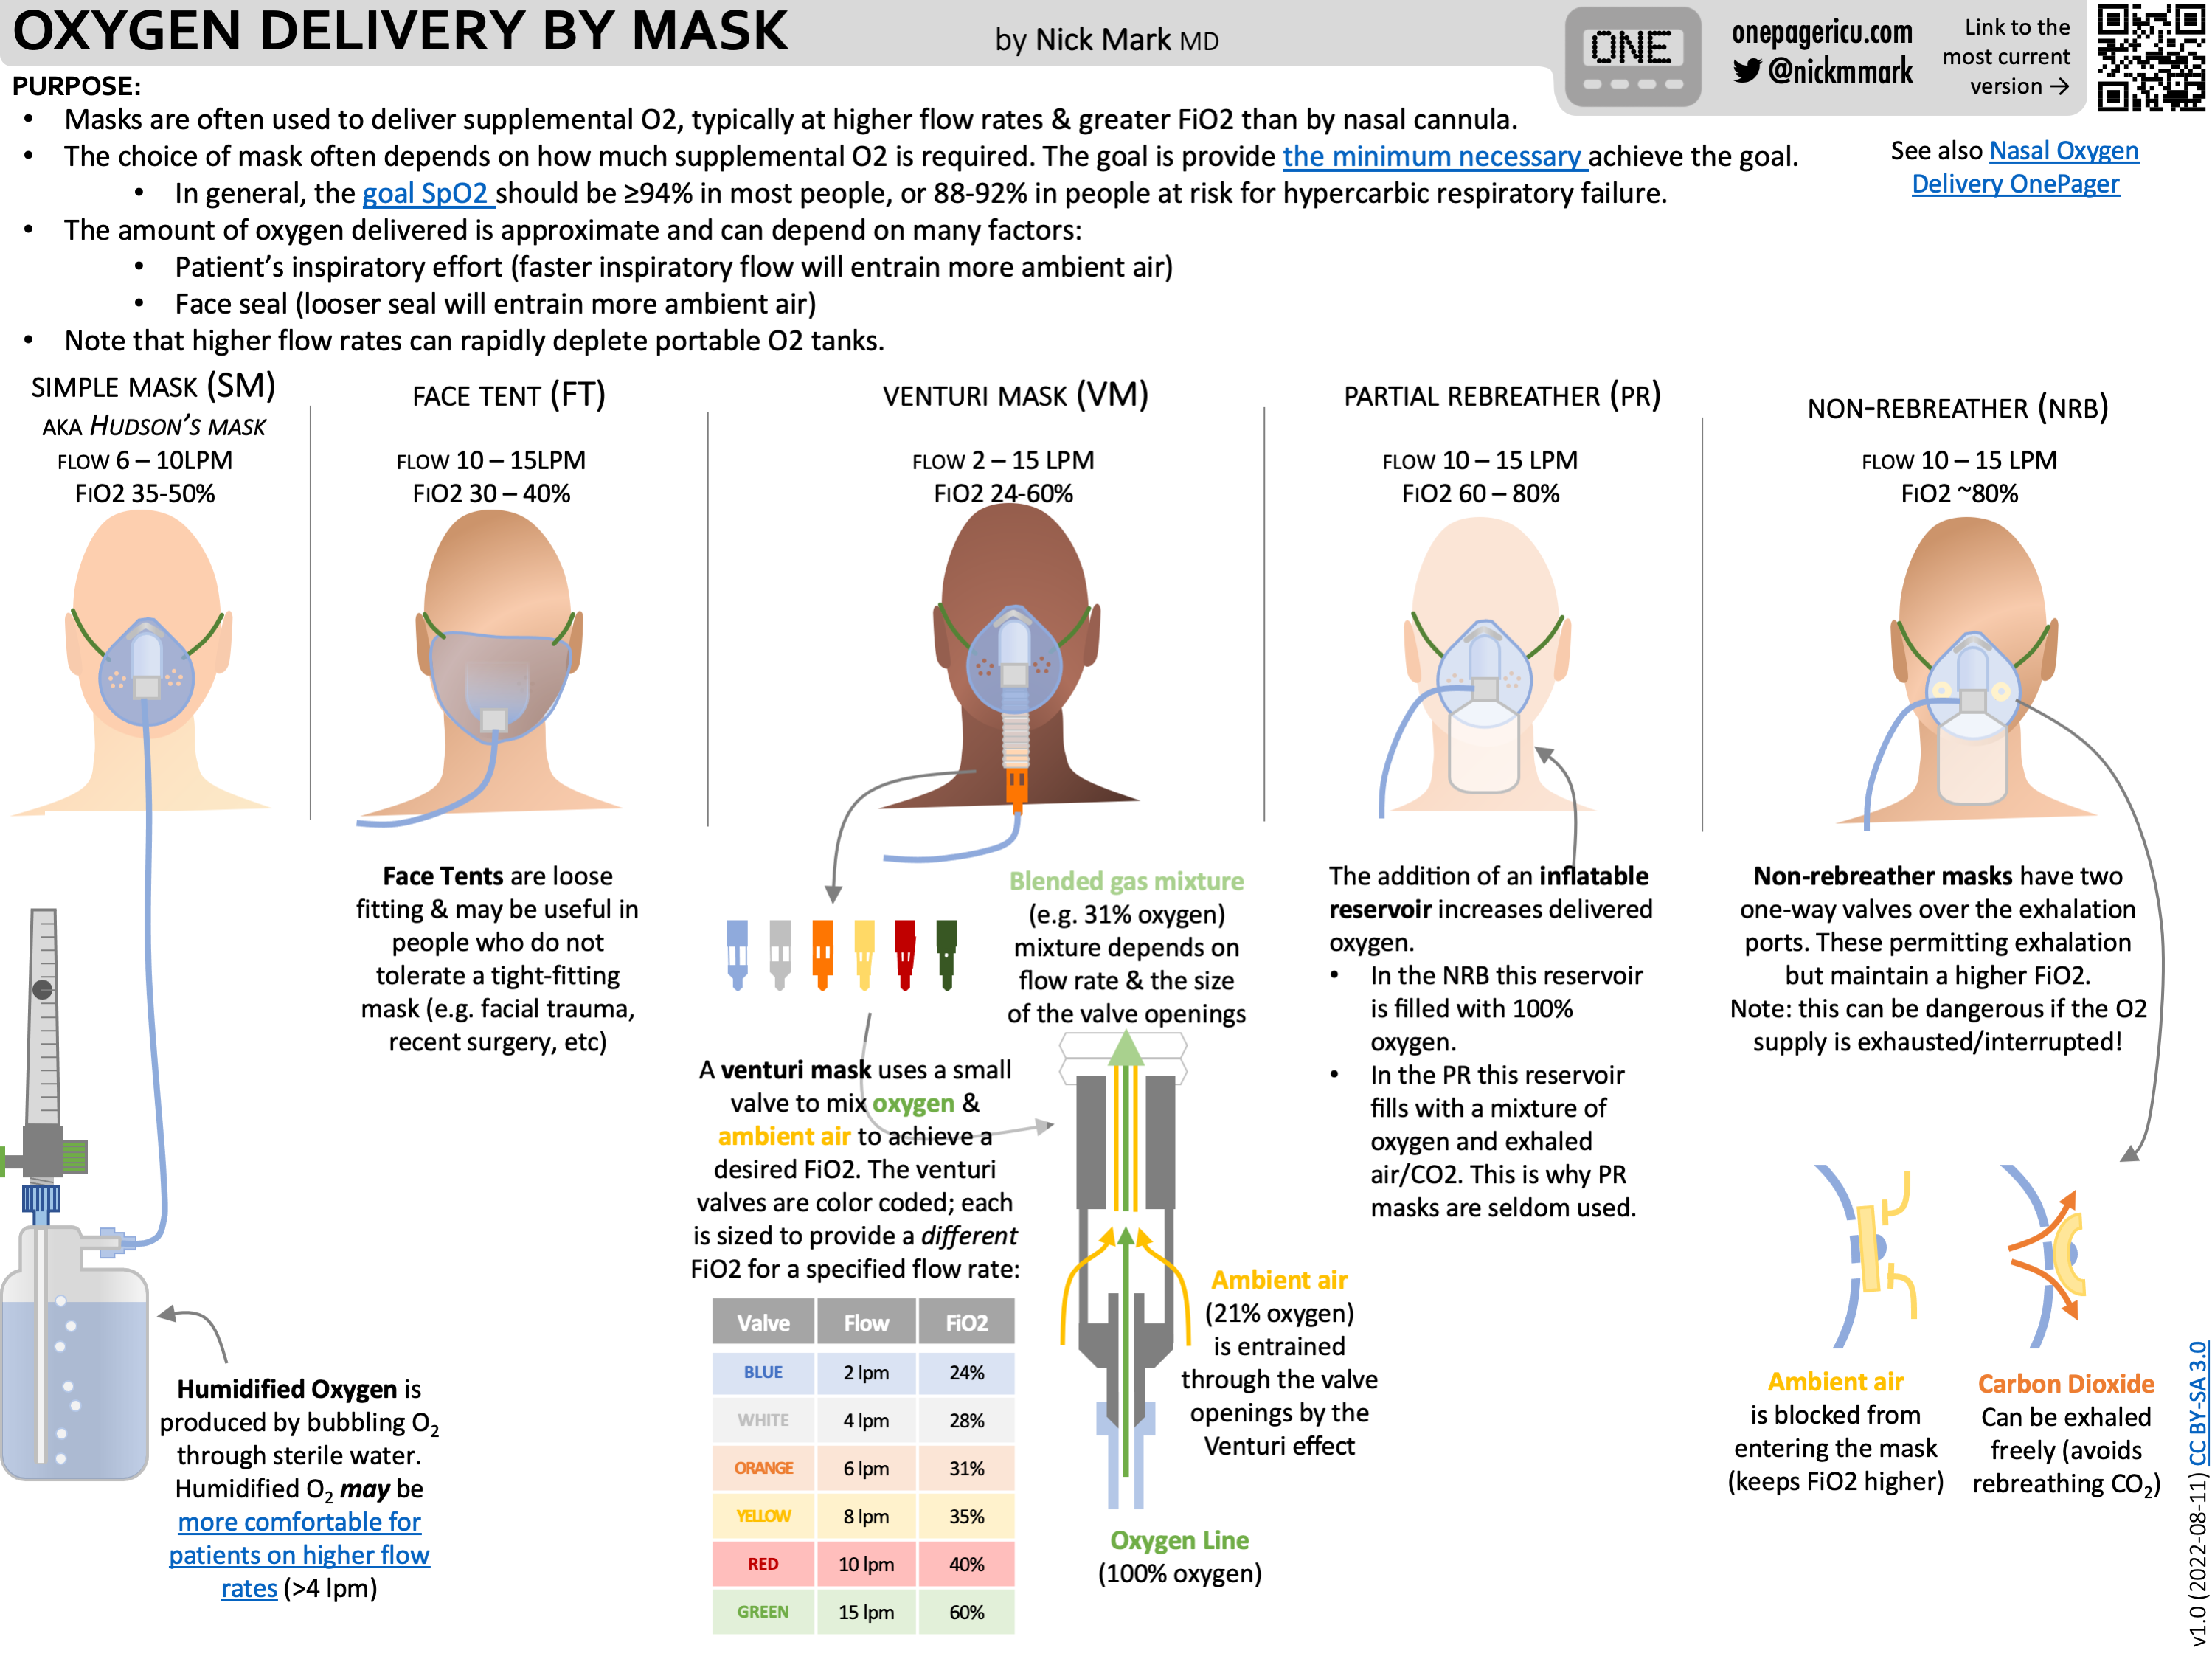 Denemarken Discreet verband Mask O2 Delivery — ICU One Pager